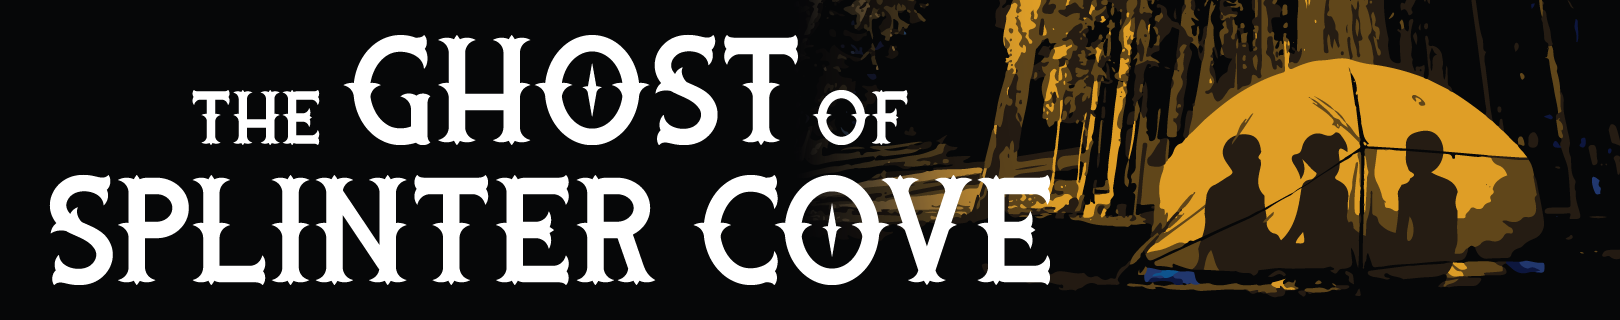 The Ghost of Splinter Cove banner